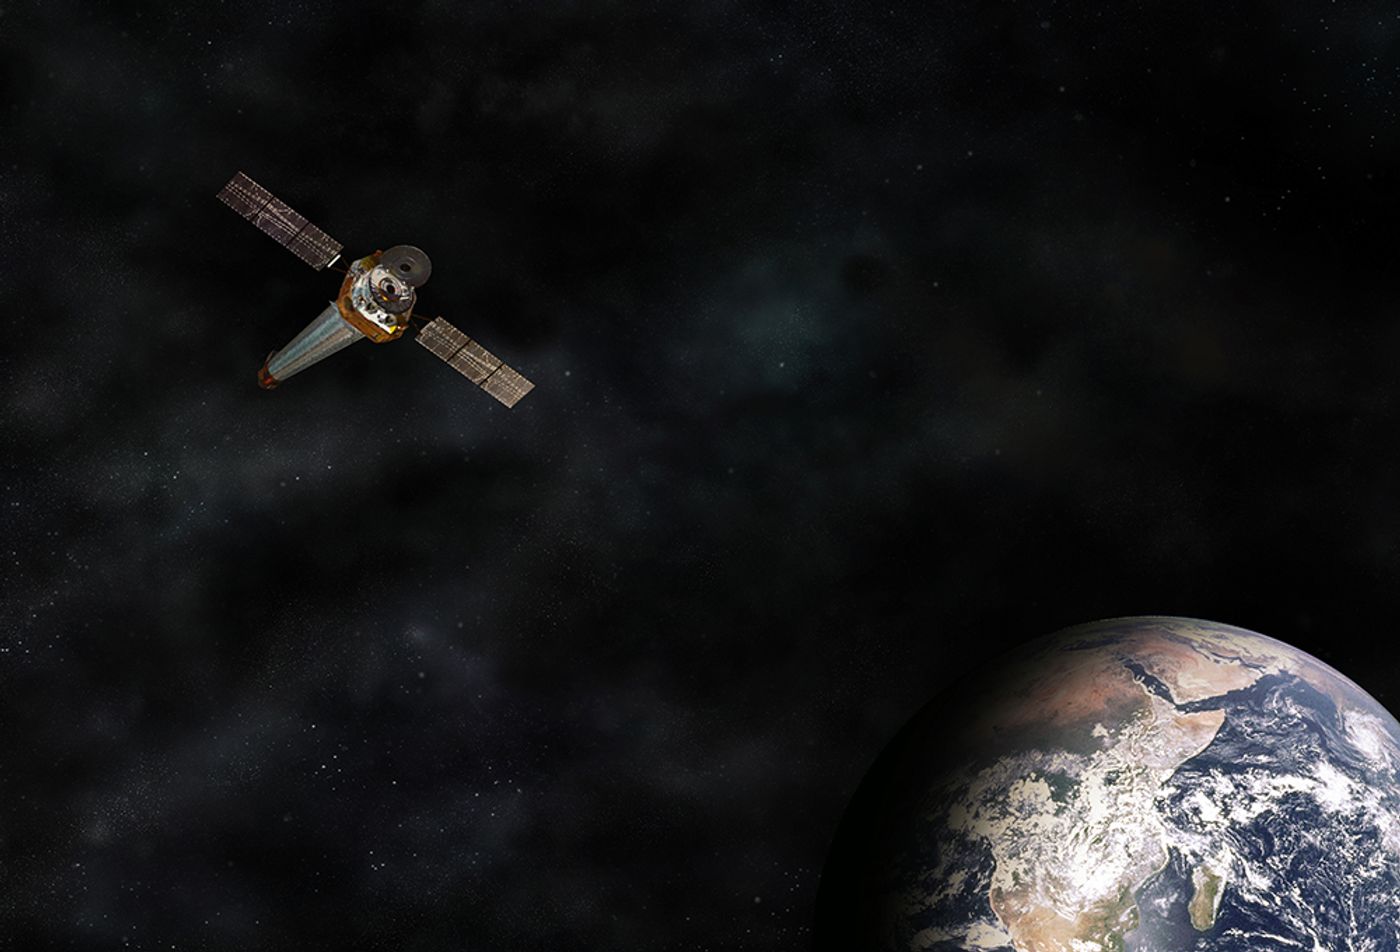 An artist's rendition depicting the Chandra X-ray Observatory orbiting the Earth.